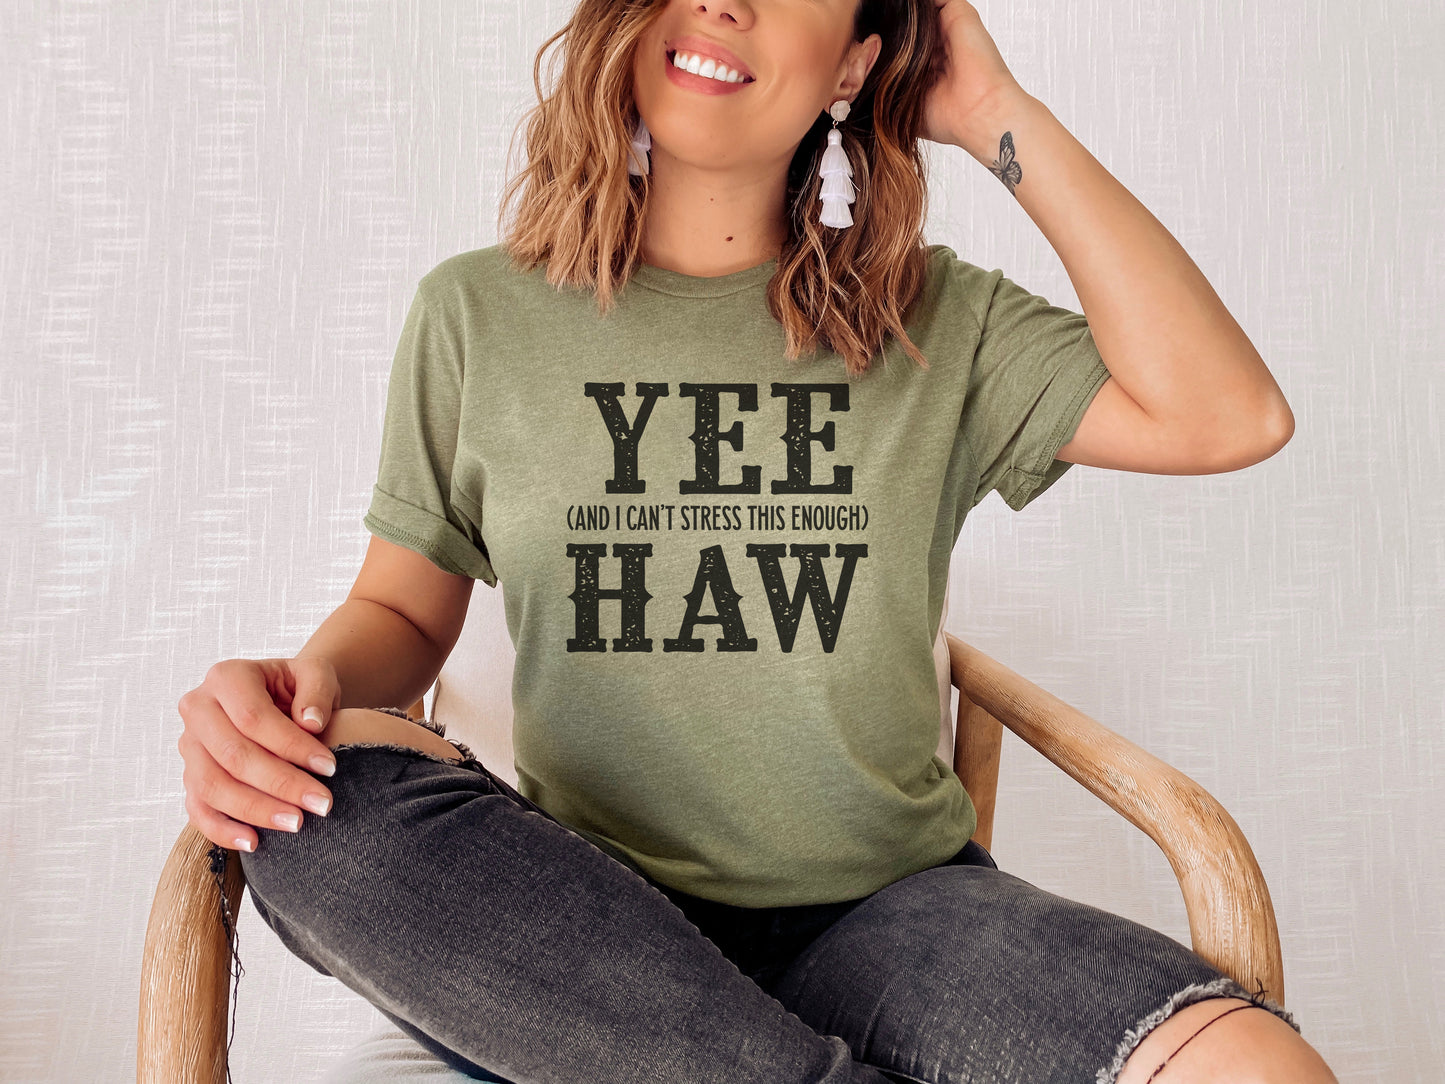 Yee (and I can't stress this enough) Haw tee shirt